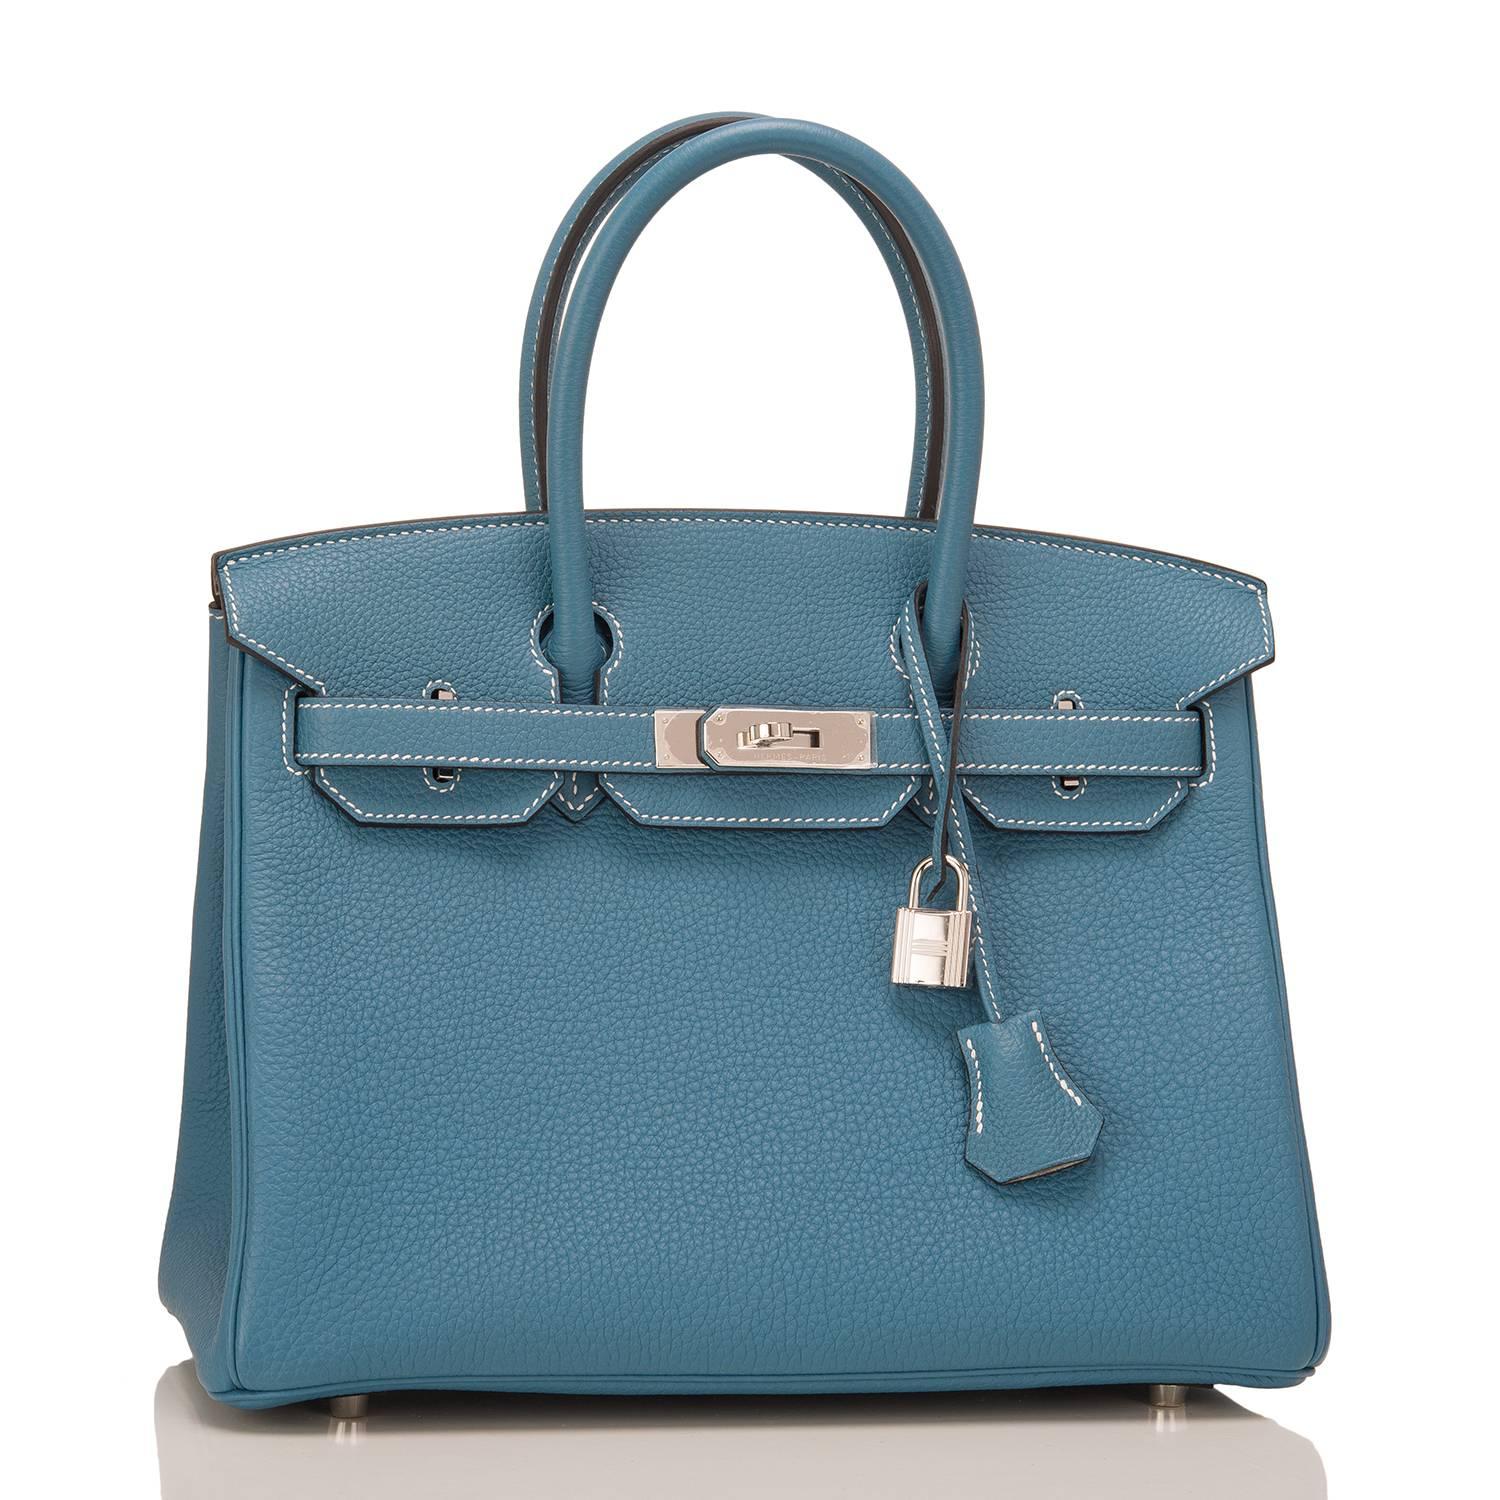 Hermes Horseshoe Stamped Birkin 30cm of Blue Jean and Gris Perle in togo leather with palladium hardware.

This Special Order Birkin has white contrast stitching, palladium hardware, double rolled handles, front toggle closure, clochette with lock